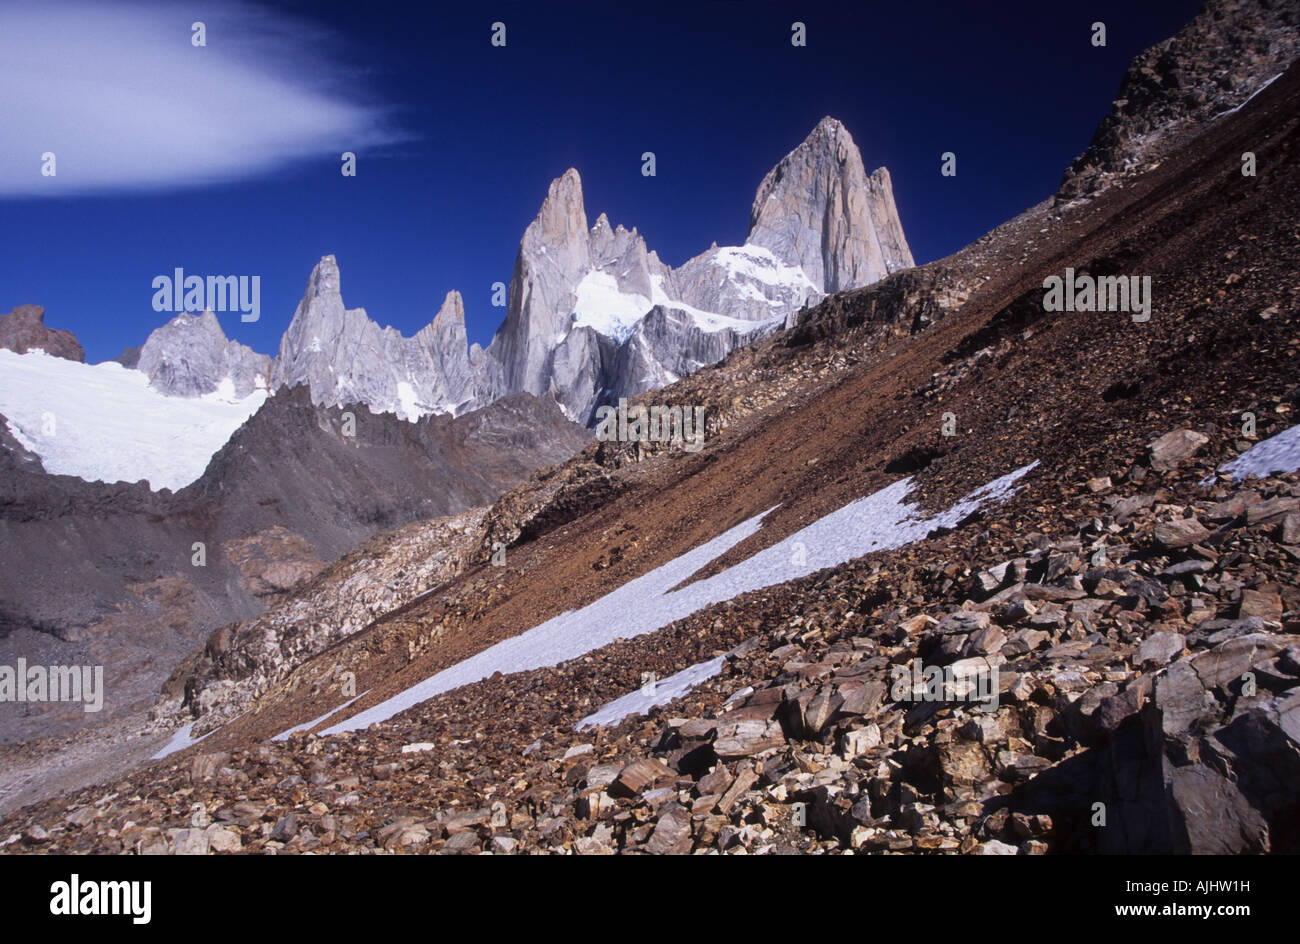 Mt Fitzroy seen from Cerro Madsen, scree slope in foreground, Los Glaciares National Park, Patagonia, Argentina Stock Photo